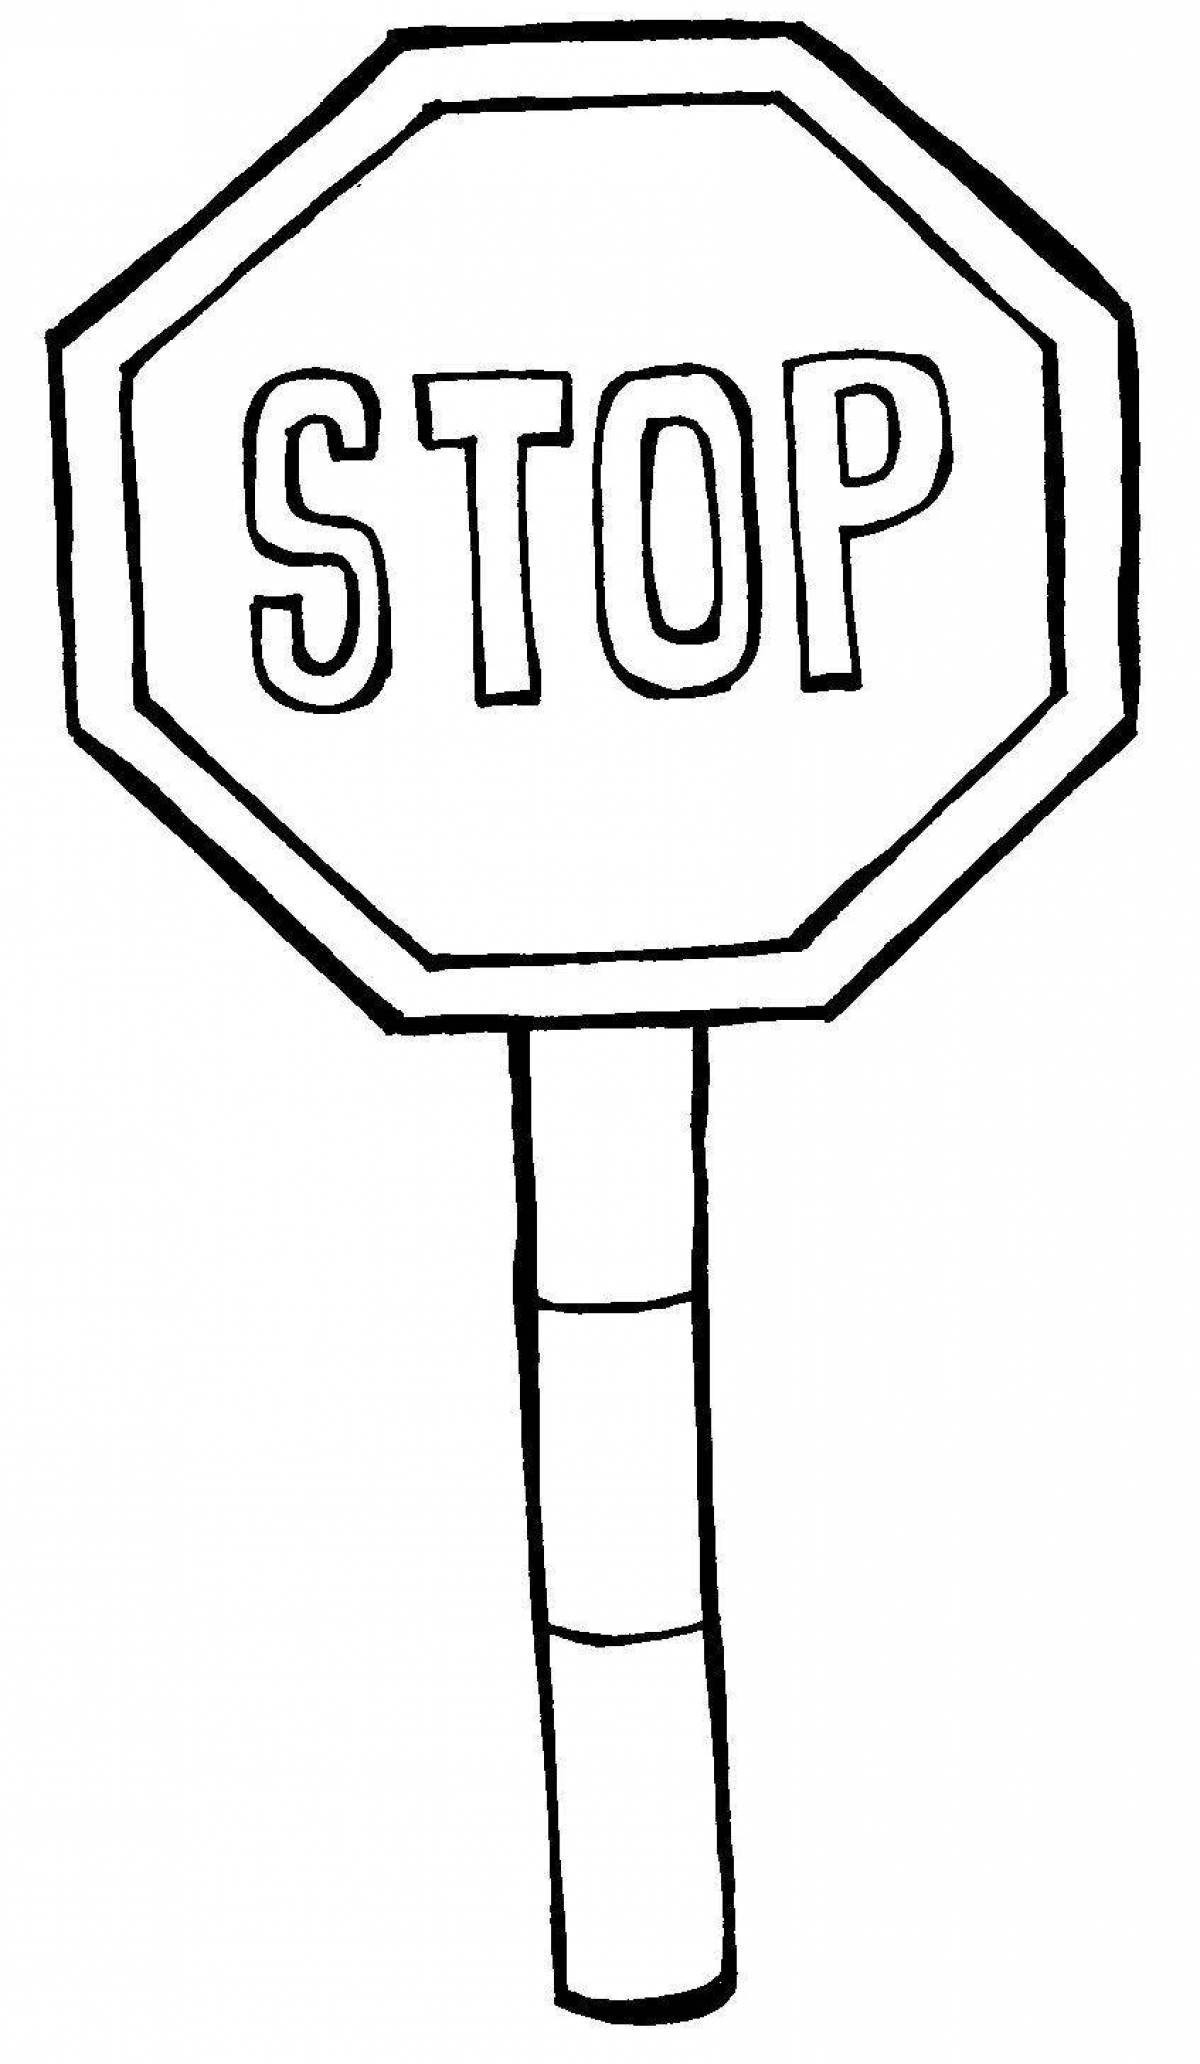 Coloring book grand stop sign